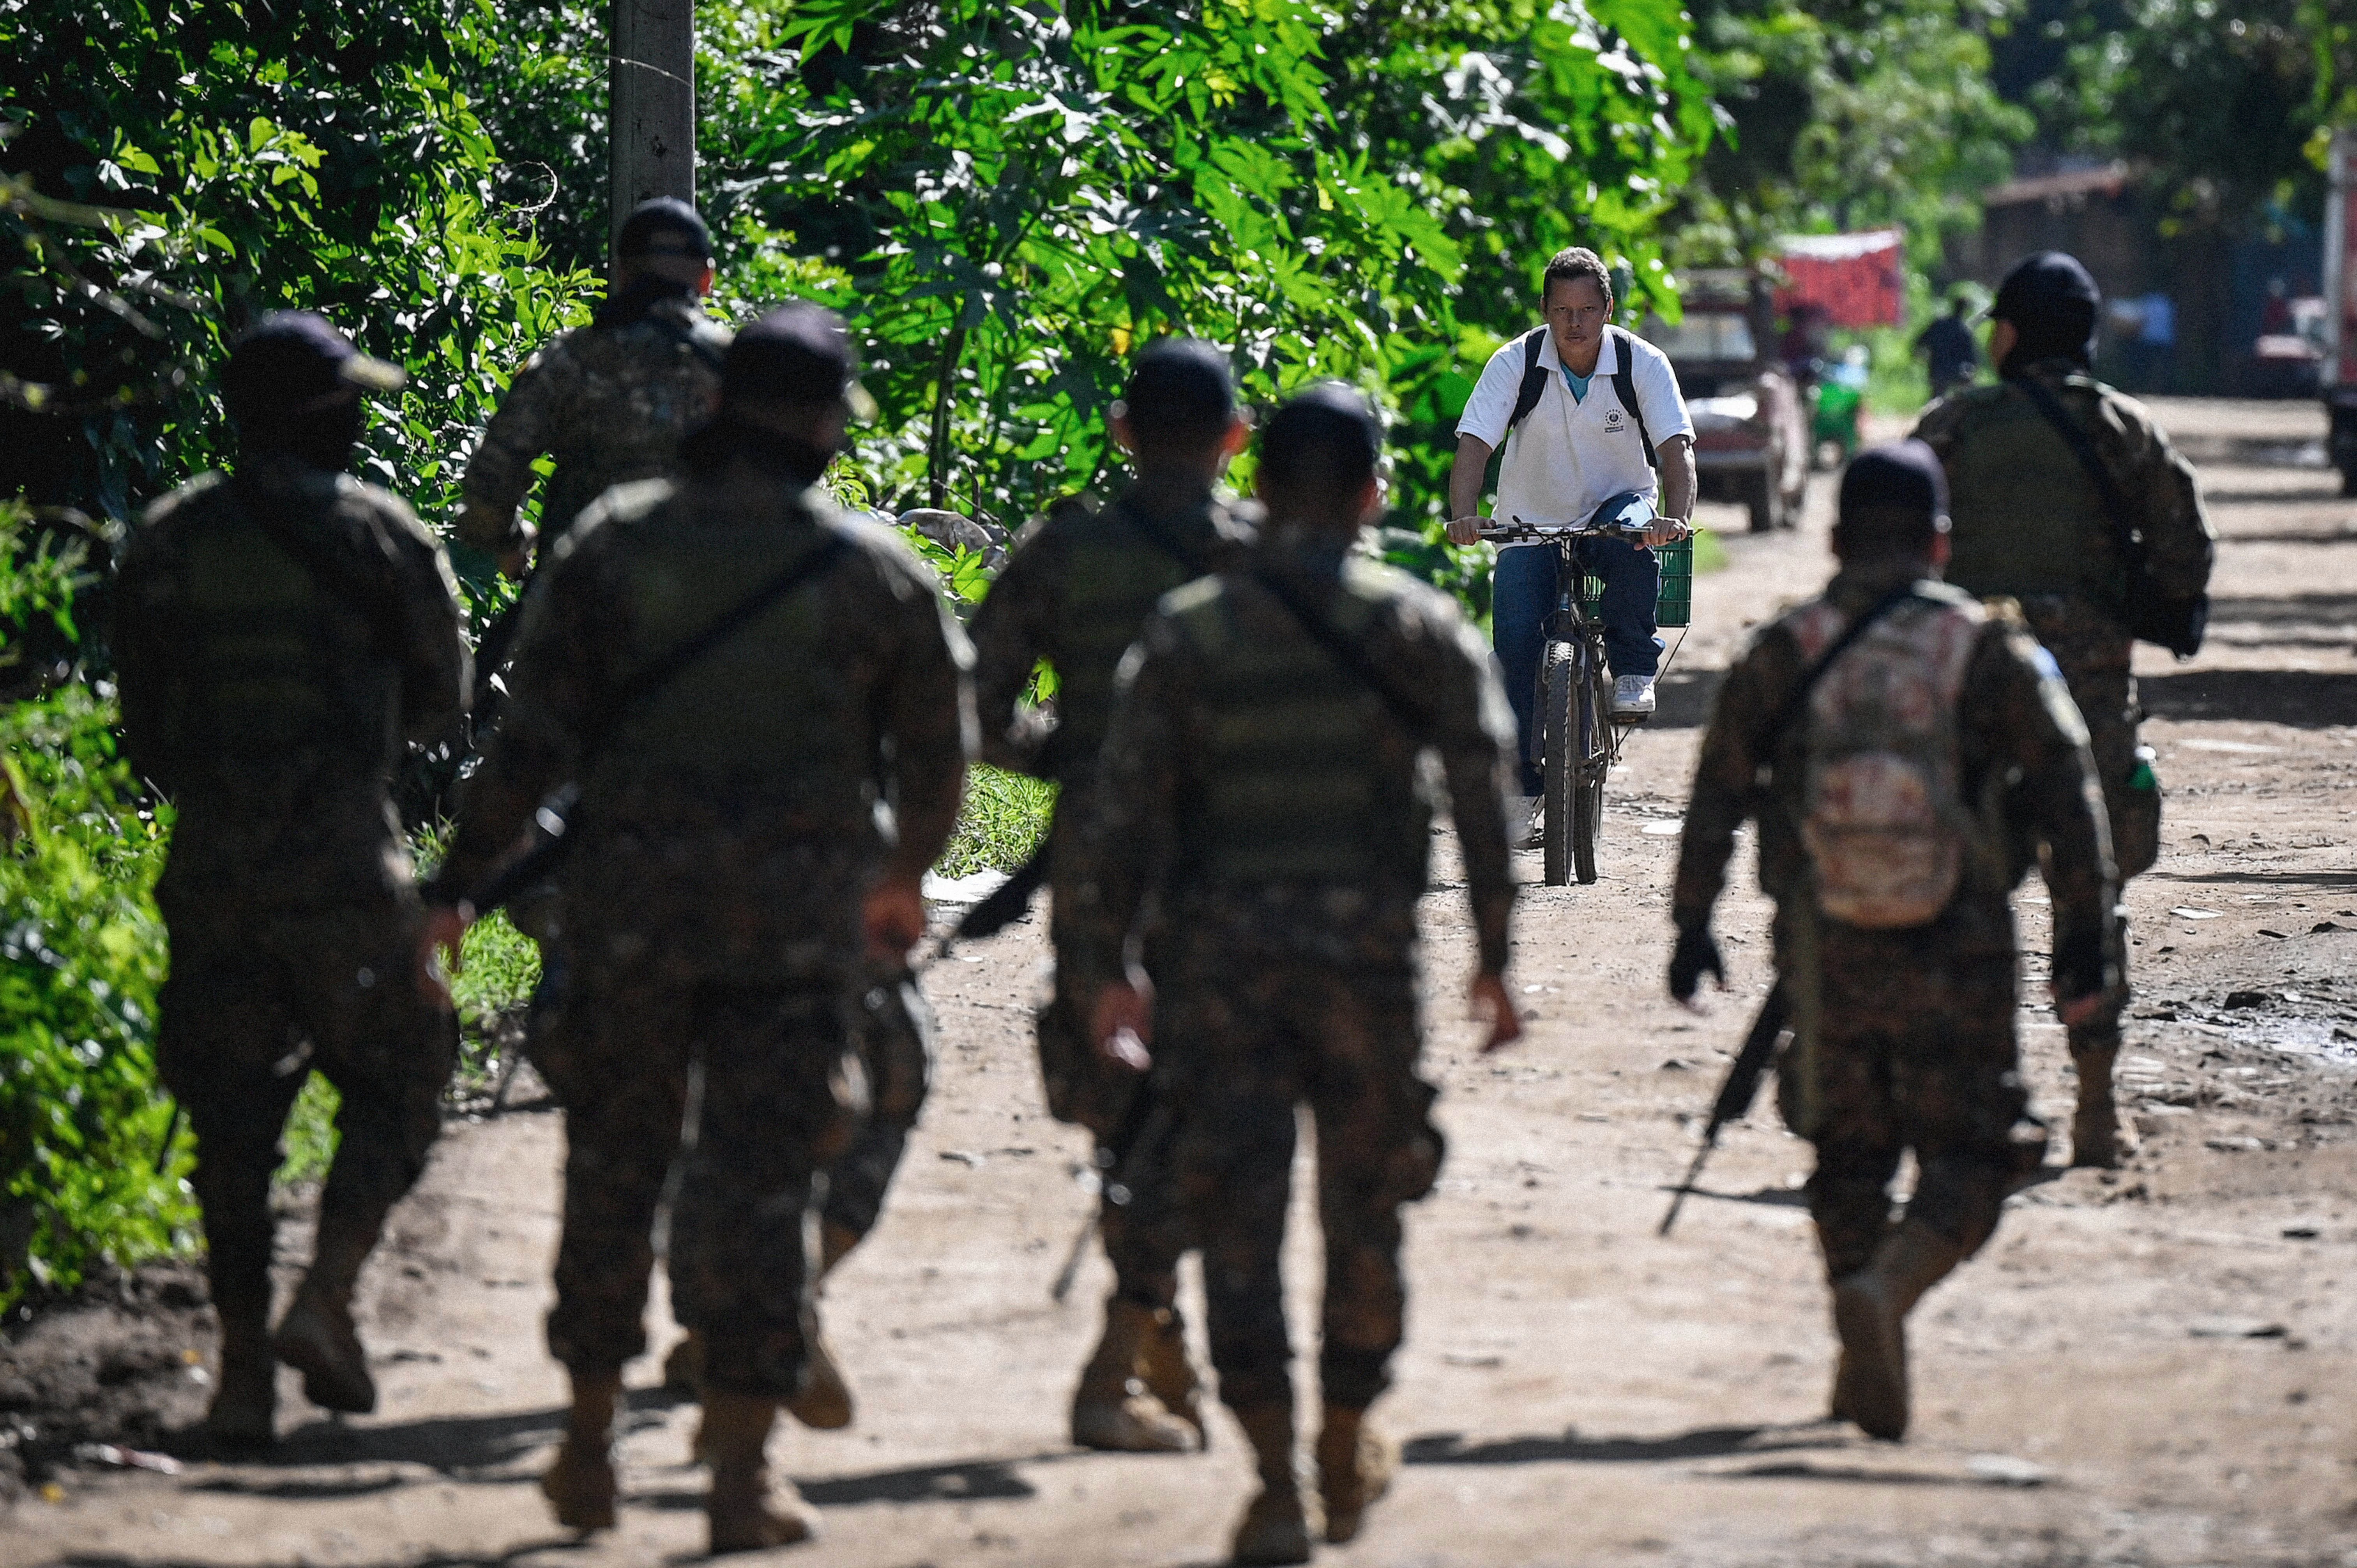 Soldiers search for gang members during the state of emergency declared by the Salvadoran government, in Santa Ana, El Salvador, on June 30, 2022. - In response to a spate of 87 murders committed between 25 and 27 March, Congress granted a request by President Nayib Bukele to decree a state of emergency, which has been extended until at least the end of July, and has allowed more than 43,000 suspected gang members to be detained without warrants. Organisations such as Amnesty International and the NGO Human Rights Watch have questioned the procedures and called on Bukele to respect human rights. The US government has also expressed concern about "arbitrary" detentions and "deaths in custody". (Photo by MARVIN RECINOS / AFP) (Photo by MARVIN RECINOS/AFP via Getty Images)